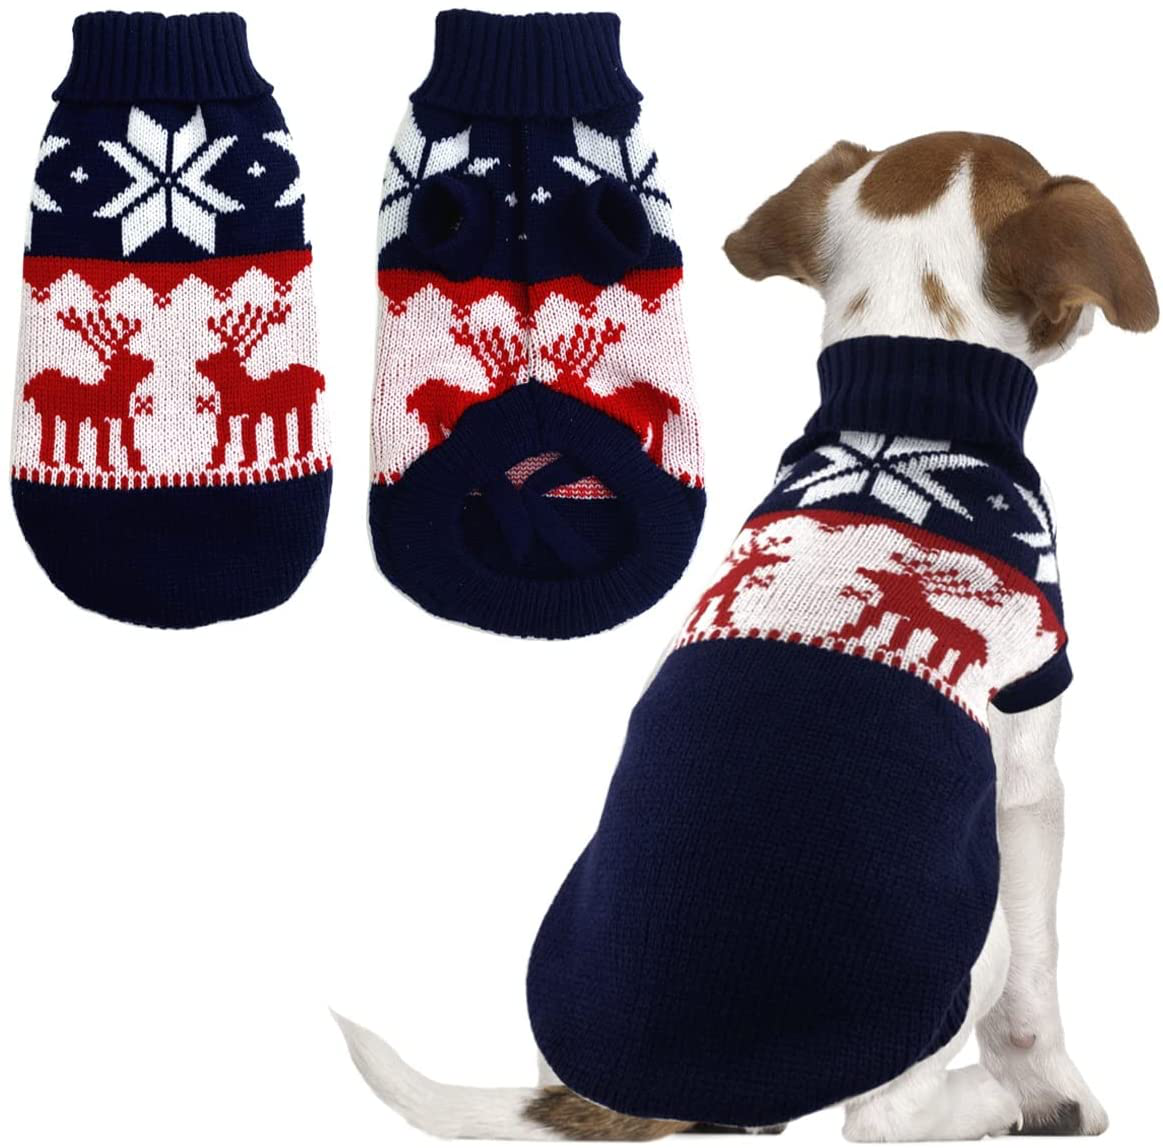 Vehomy Pet Puppy Christmas Sweater Cat Winter Knitwear Xmas Clothes Navy Blue Sweater with Reindeers Snowflakes Pattern Dog Warm Argyle Sweater Coat for Kittens Small Dogs Cats Animals & Pet Supplies > Pet Supplies > Dog Supplies > Dog Apparel Vehomy X-Large  